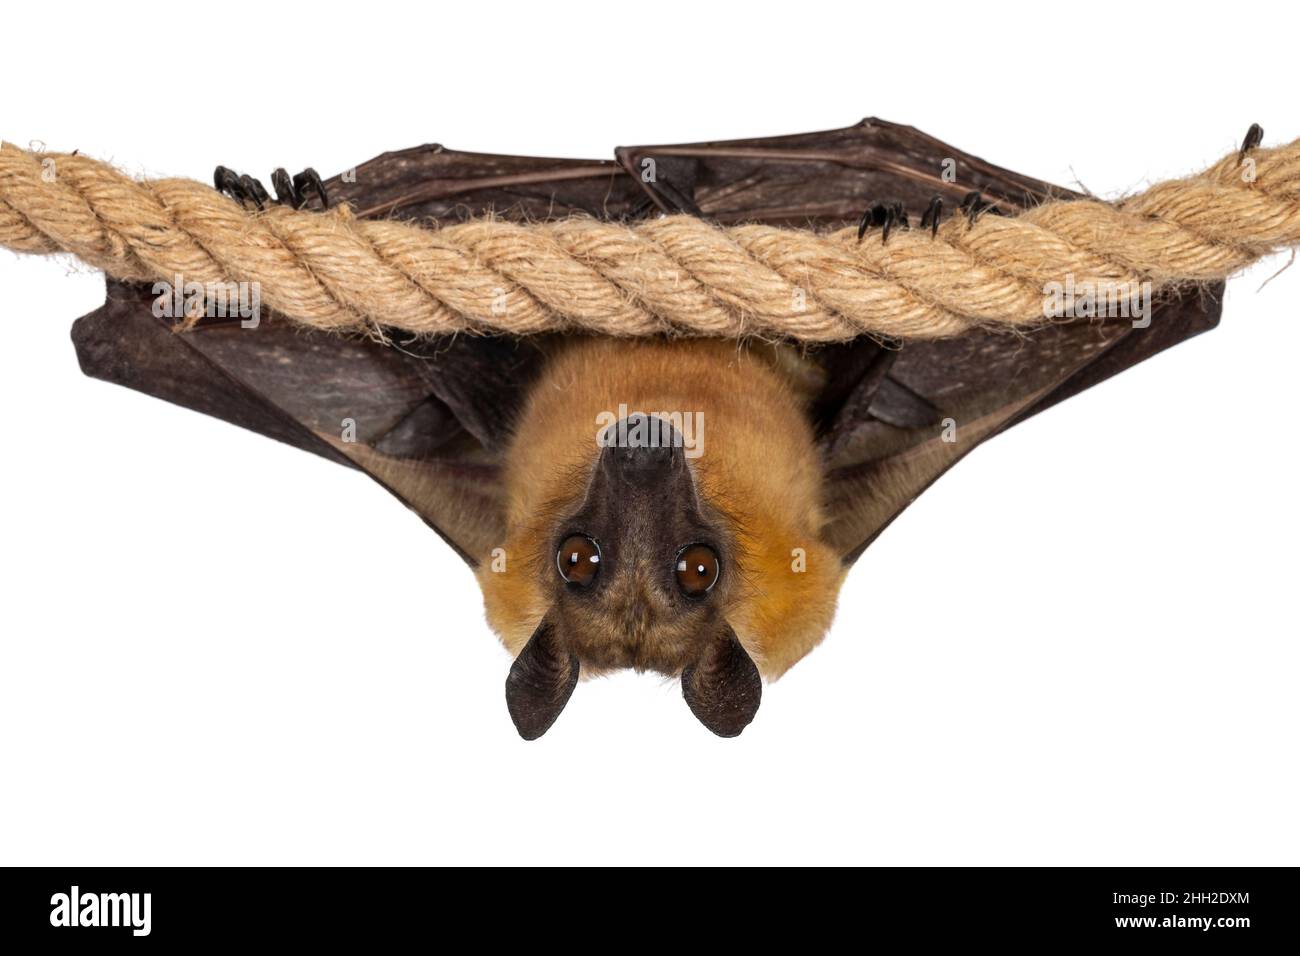 Young adult flying fox, fruit bat aka Megabat, hanging on sisal rope with wings folded. Looking straight into camera. Isolated on white background. Stock Photo